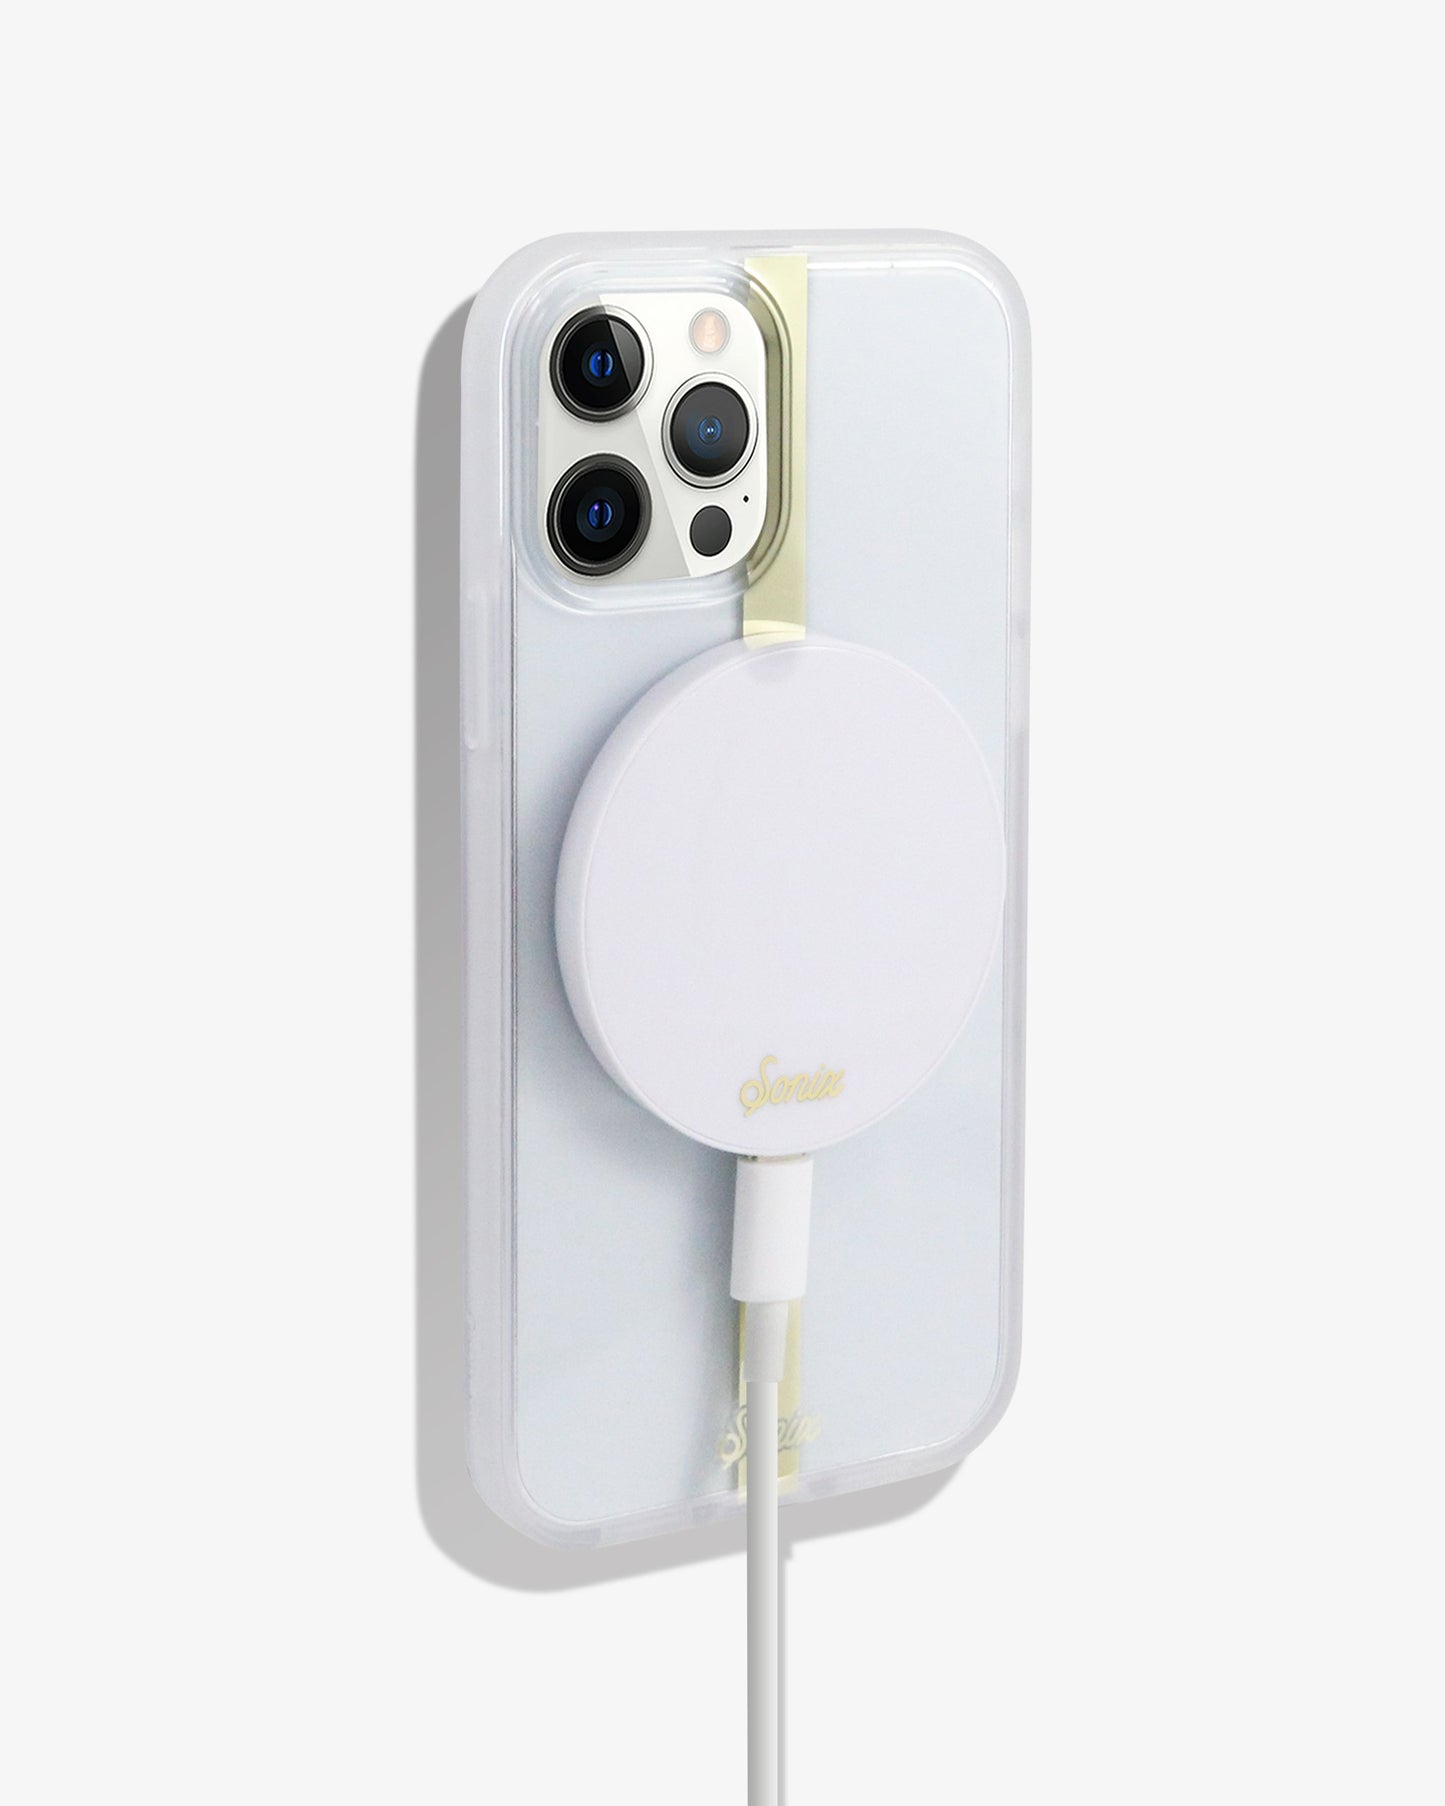 MagLink™ Wireless Charger - White